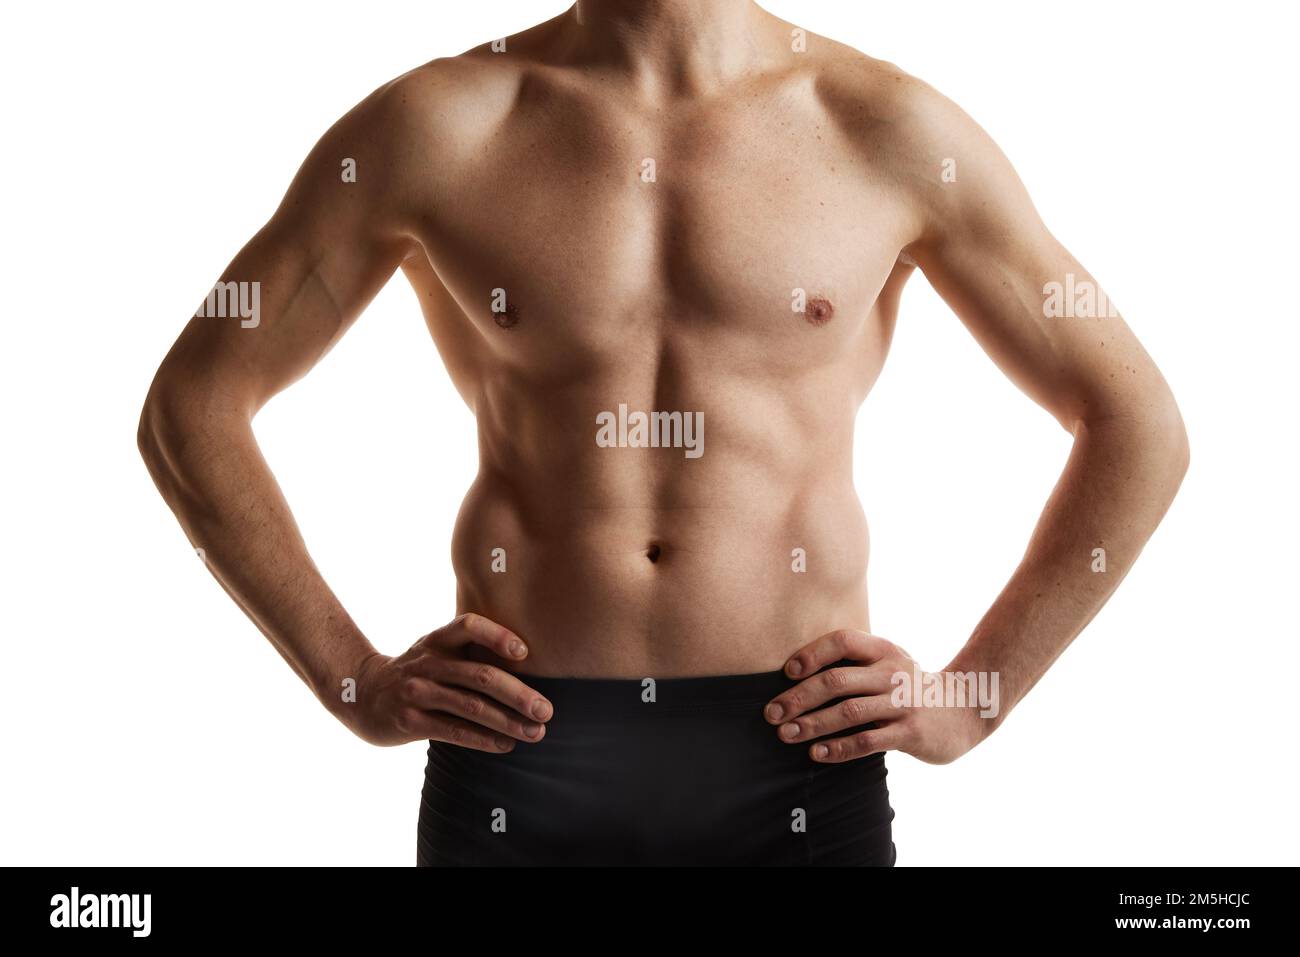 Cropped image of muscular male body, hands, belly. Man posing shirtless in black underwear over white studio background. Men's health and beauty Stock Photo